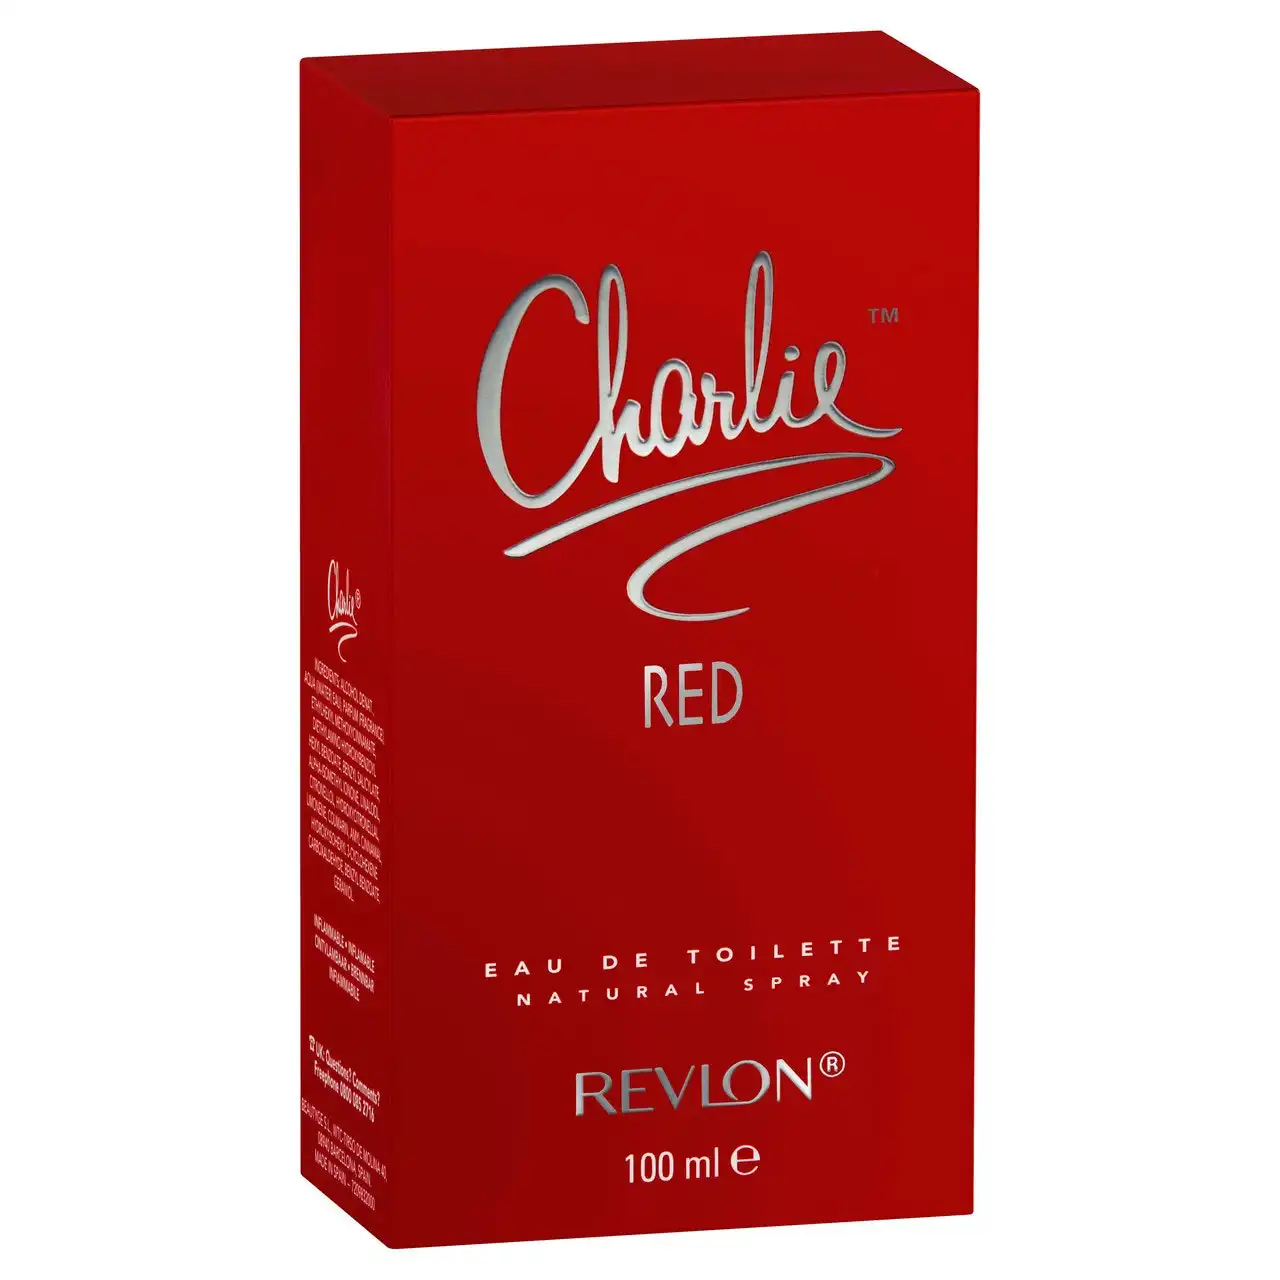 Charlie Red 100ml EDT By Revlon (Womens)